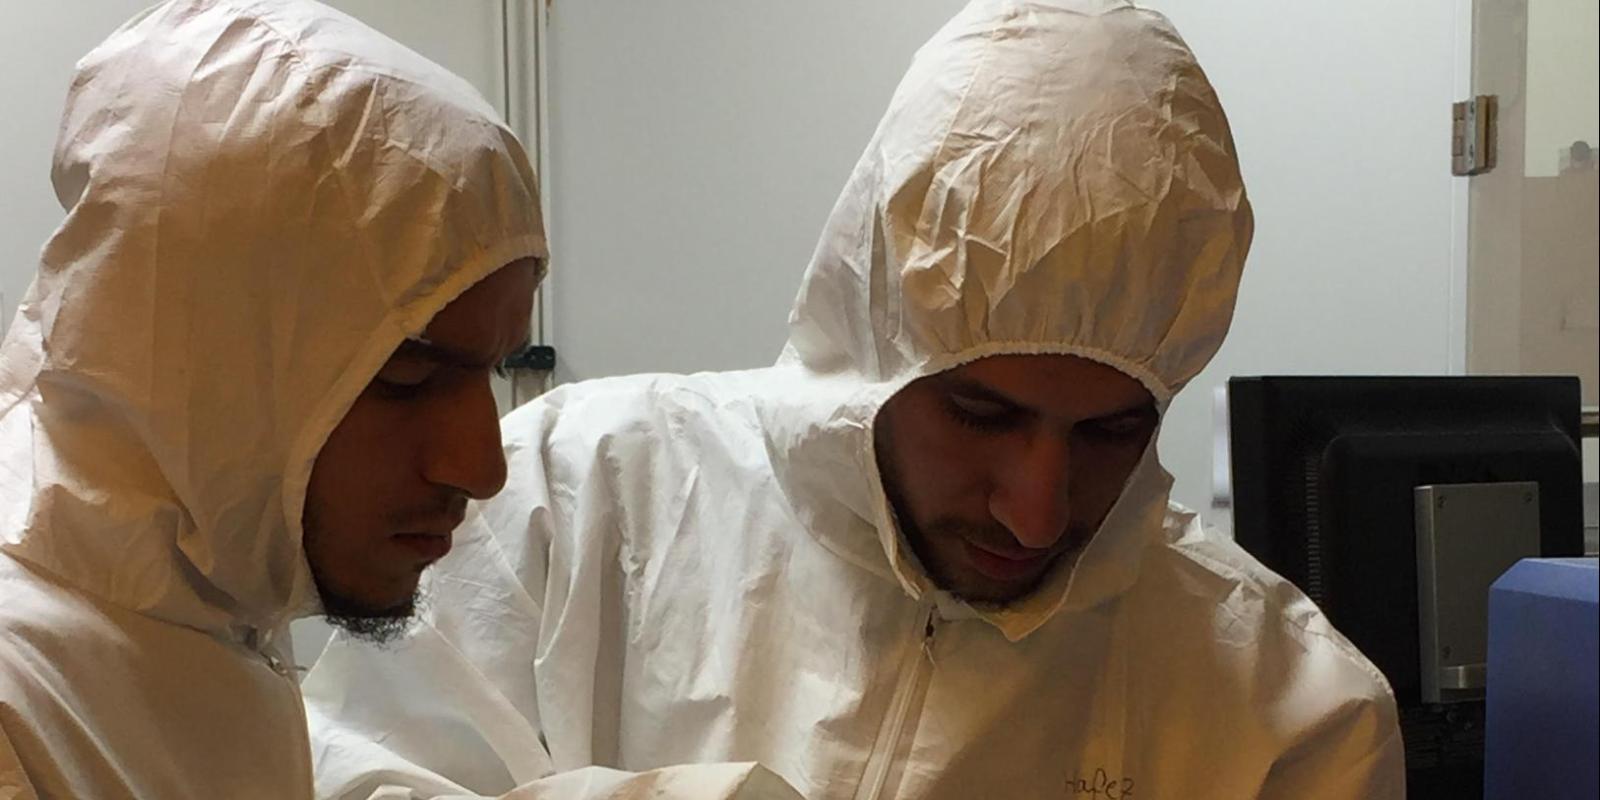 Graduate students Ahmad Amer and Ahmed Hafez work in the lab as part of Nageh Allam's team researching solar cell technology with their MIT counterparts